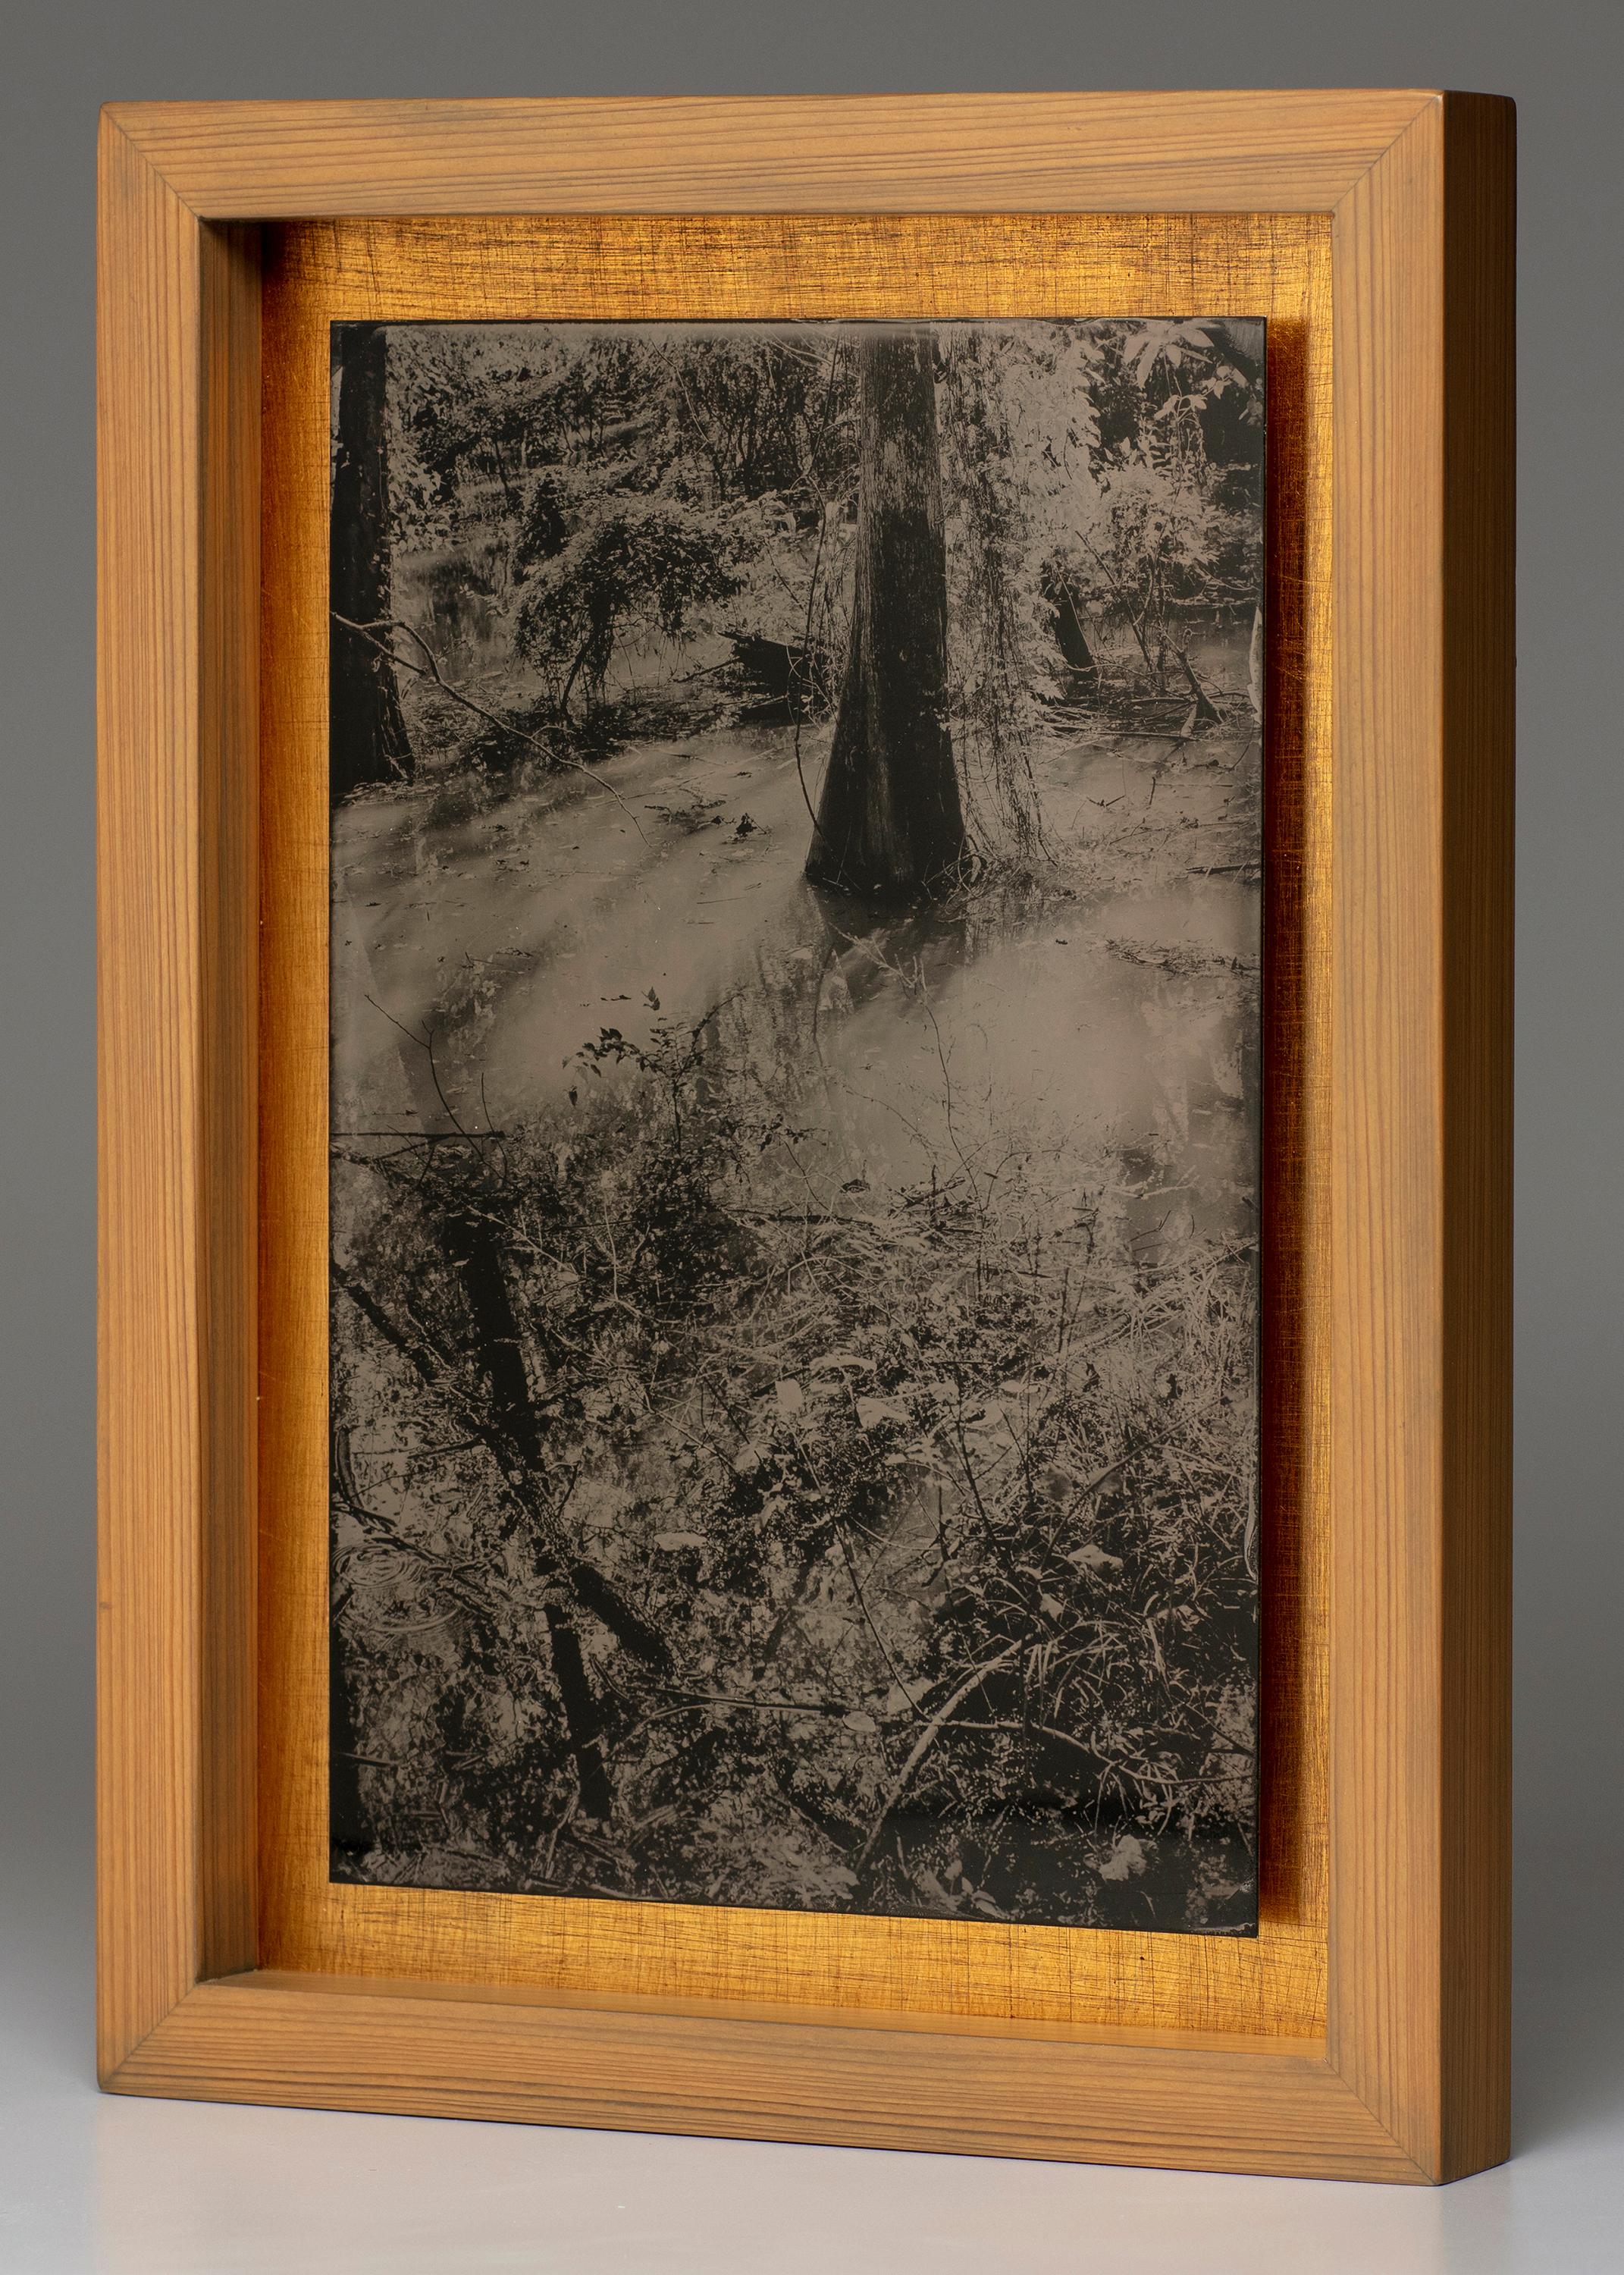 Cecilia Montalvo & Charlie McCullers Landscape Photograph - Fall of Light - wet plate collodion - landscape photography - tree